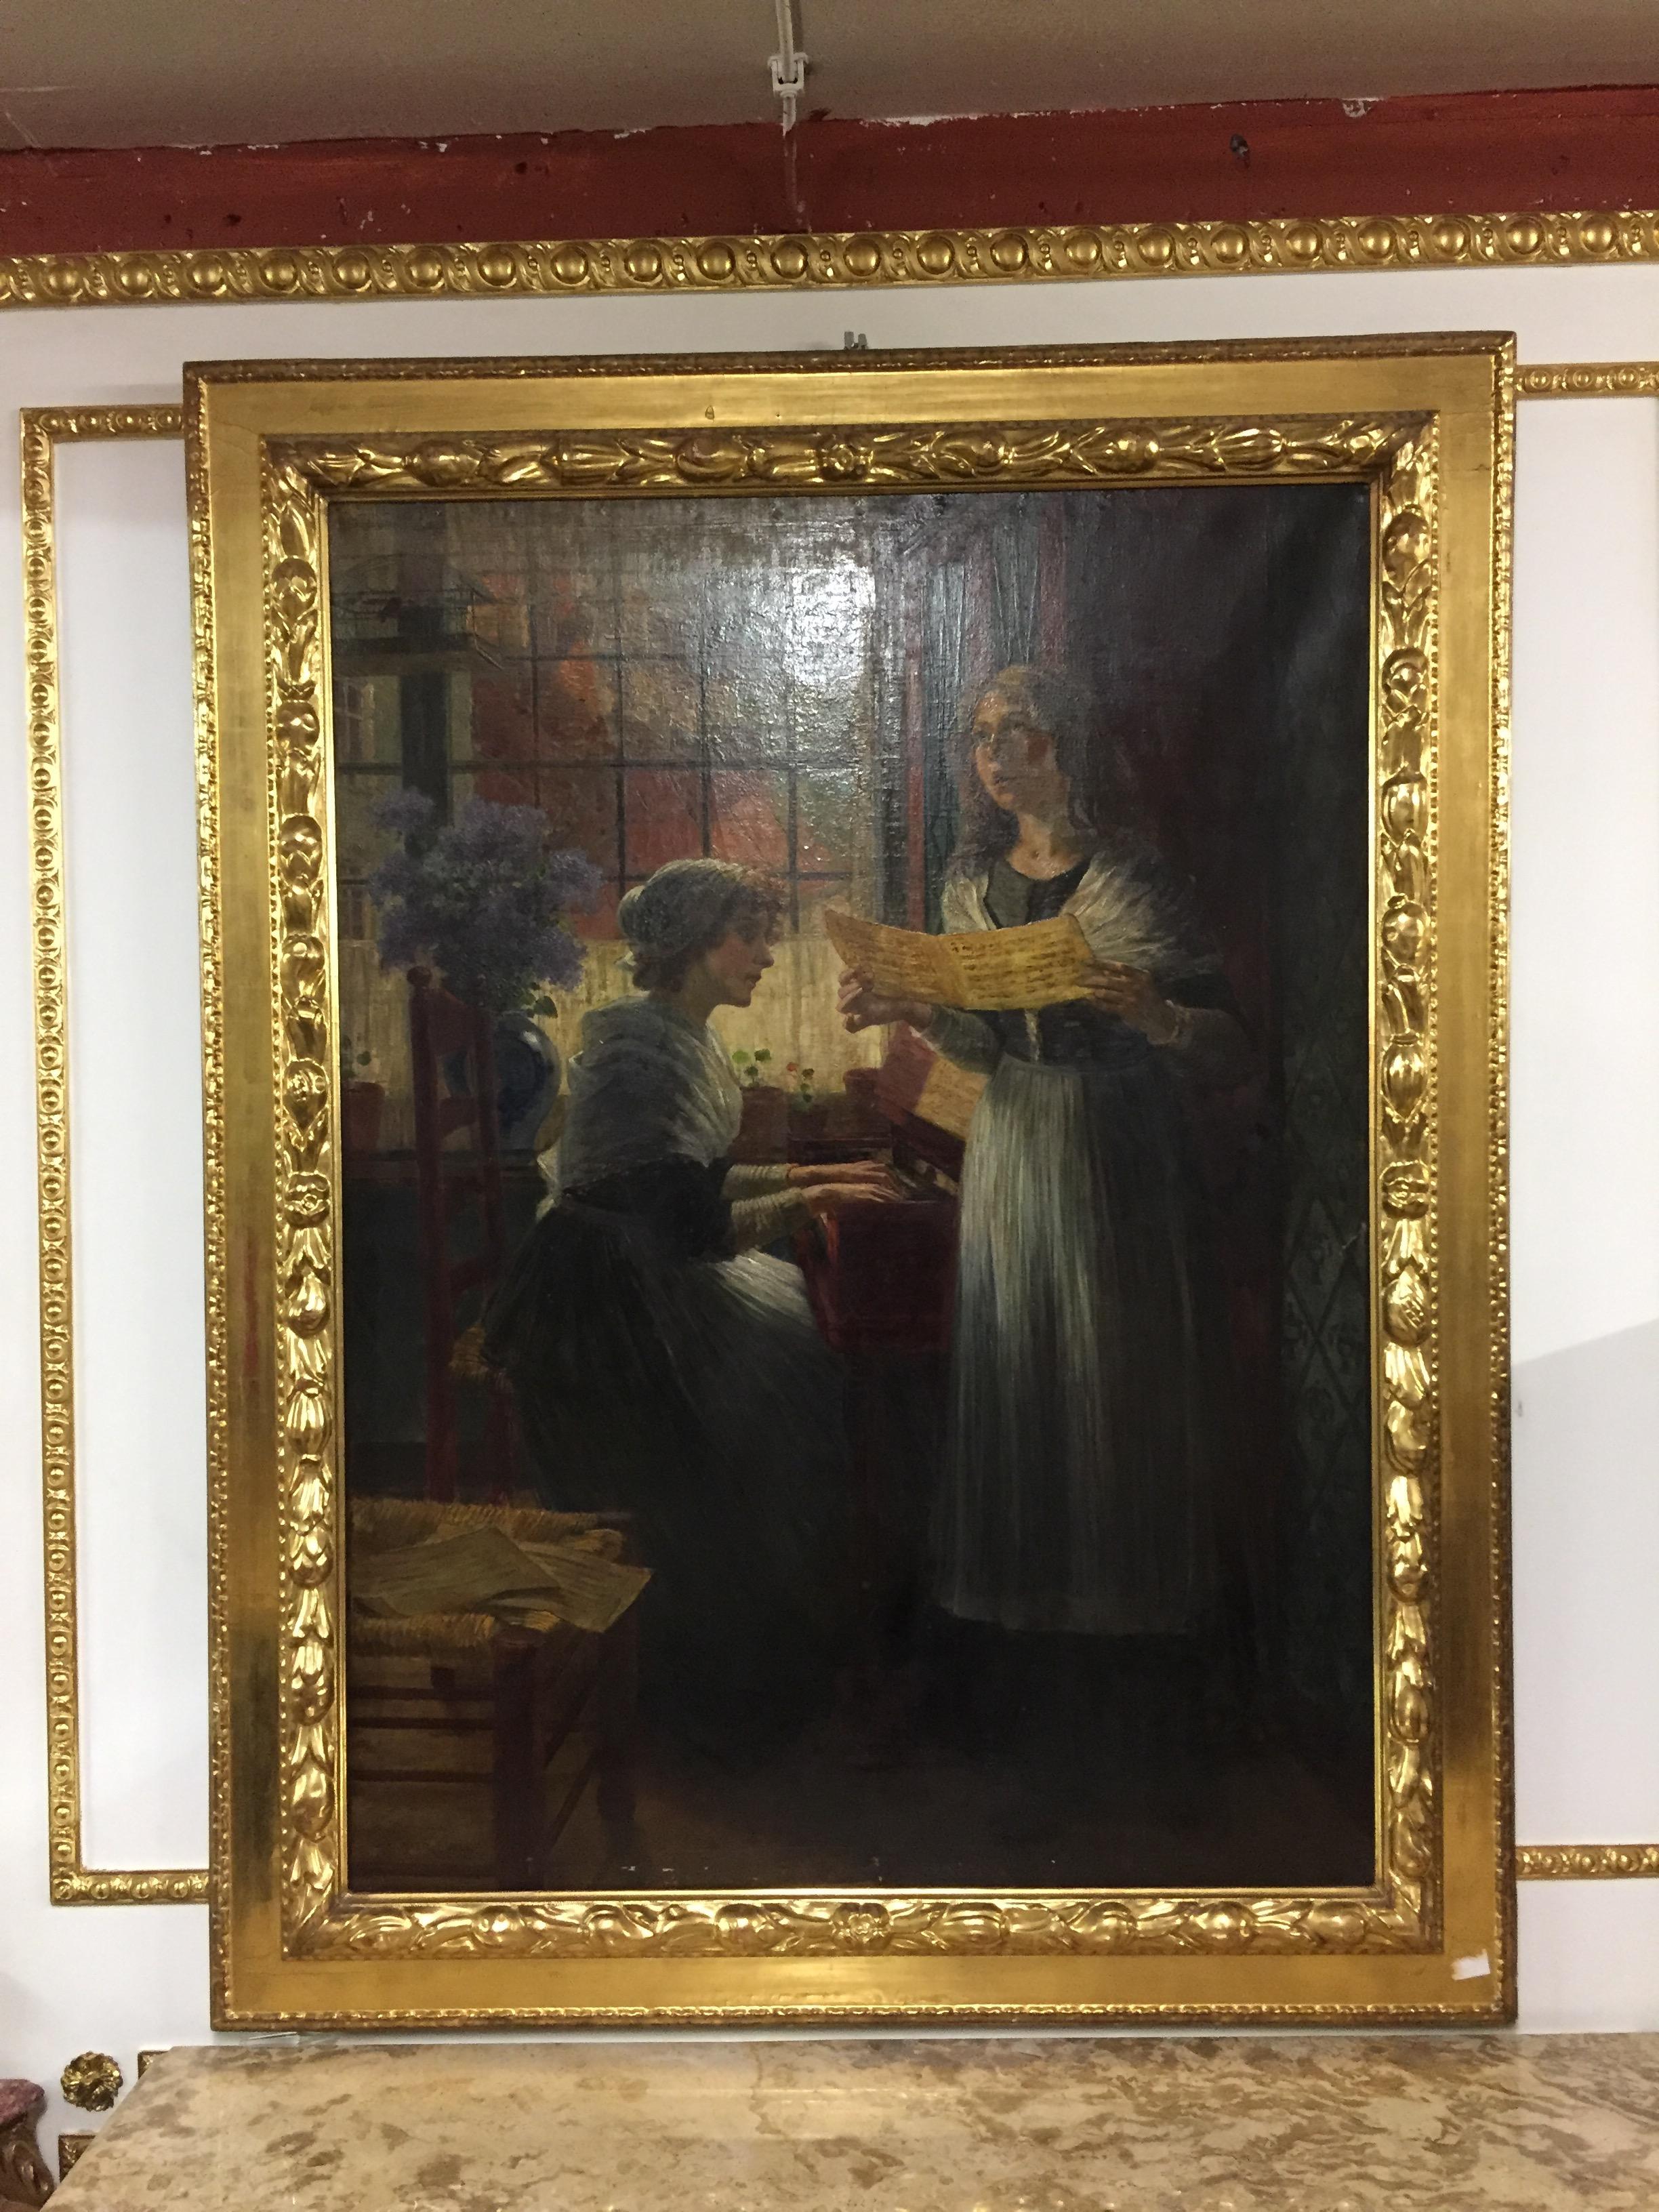 The present painting comes from the hand of the painter Walther Firle. It was created circa 1884 after a stay of the artist in Holland. In The Hague he saw a group of orphan girls whose pious singing charmed and inspired him to draw. Back in Munich,